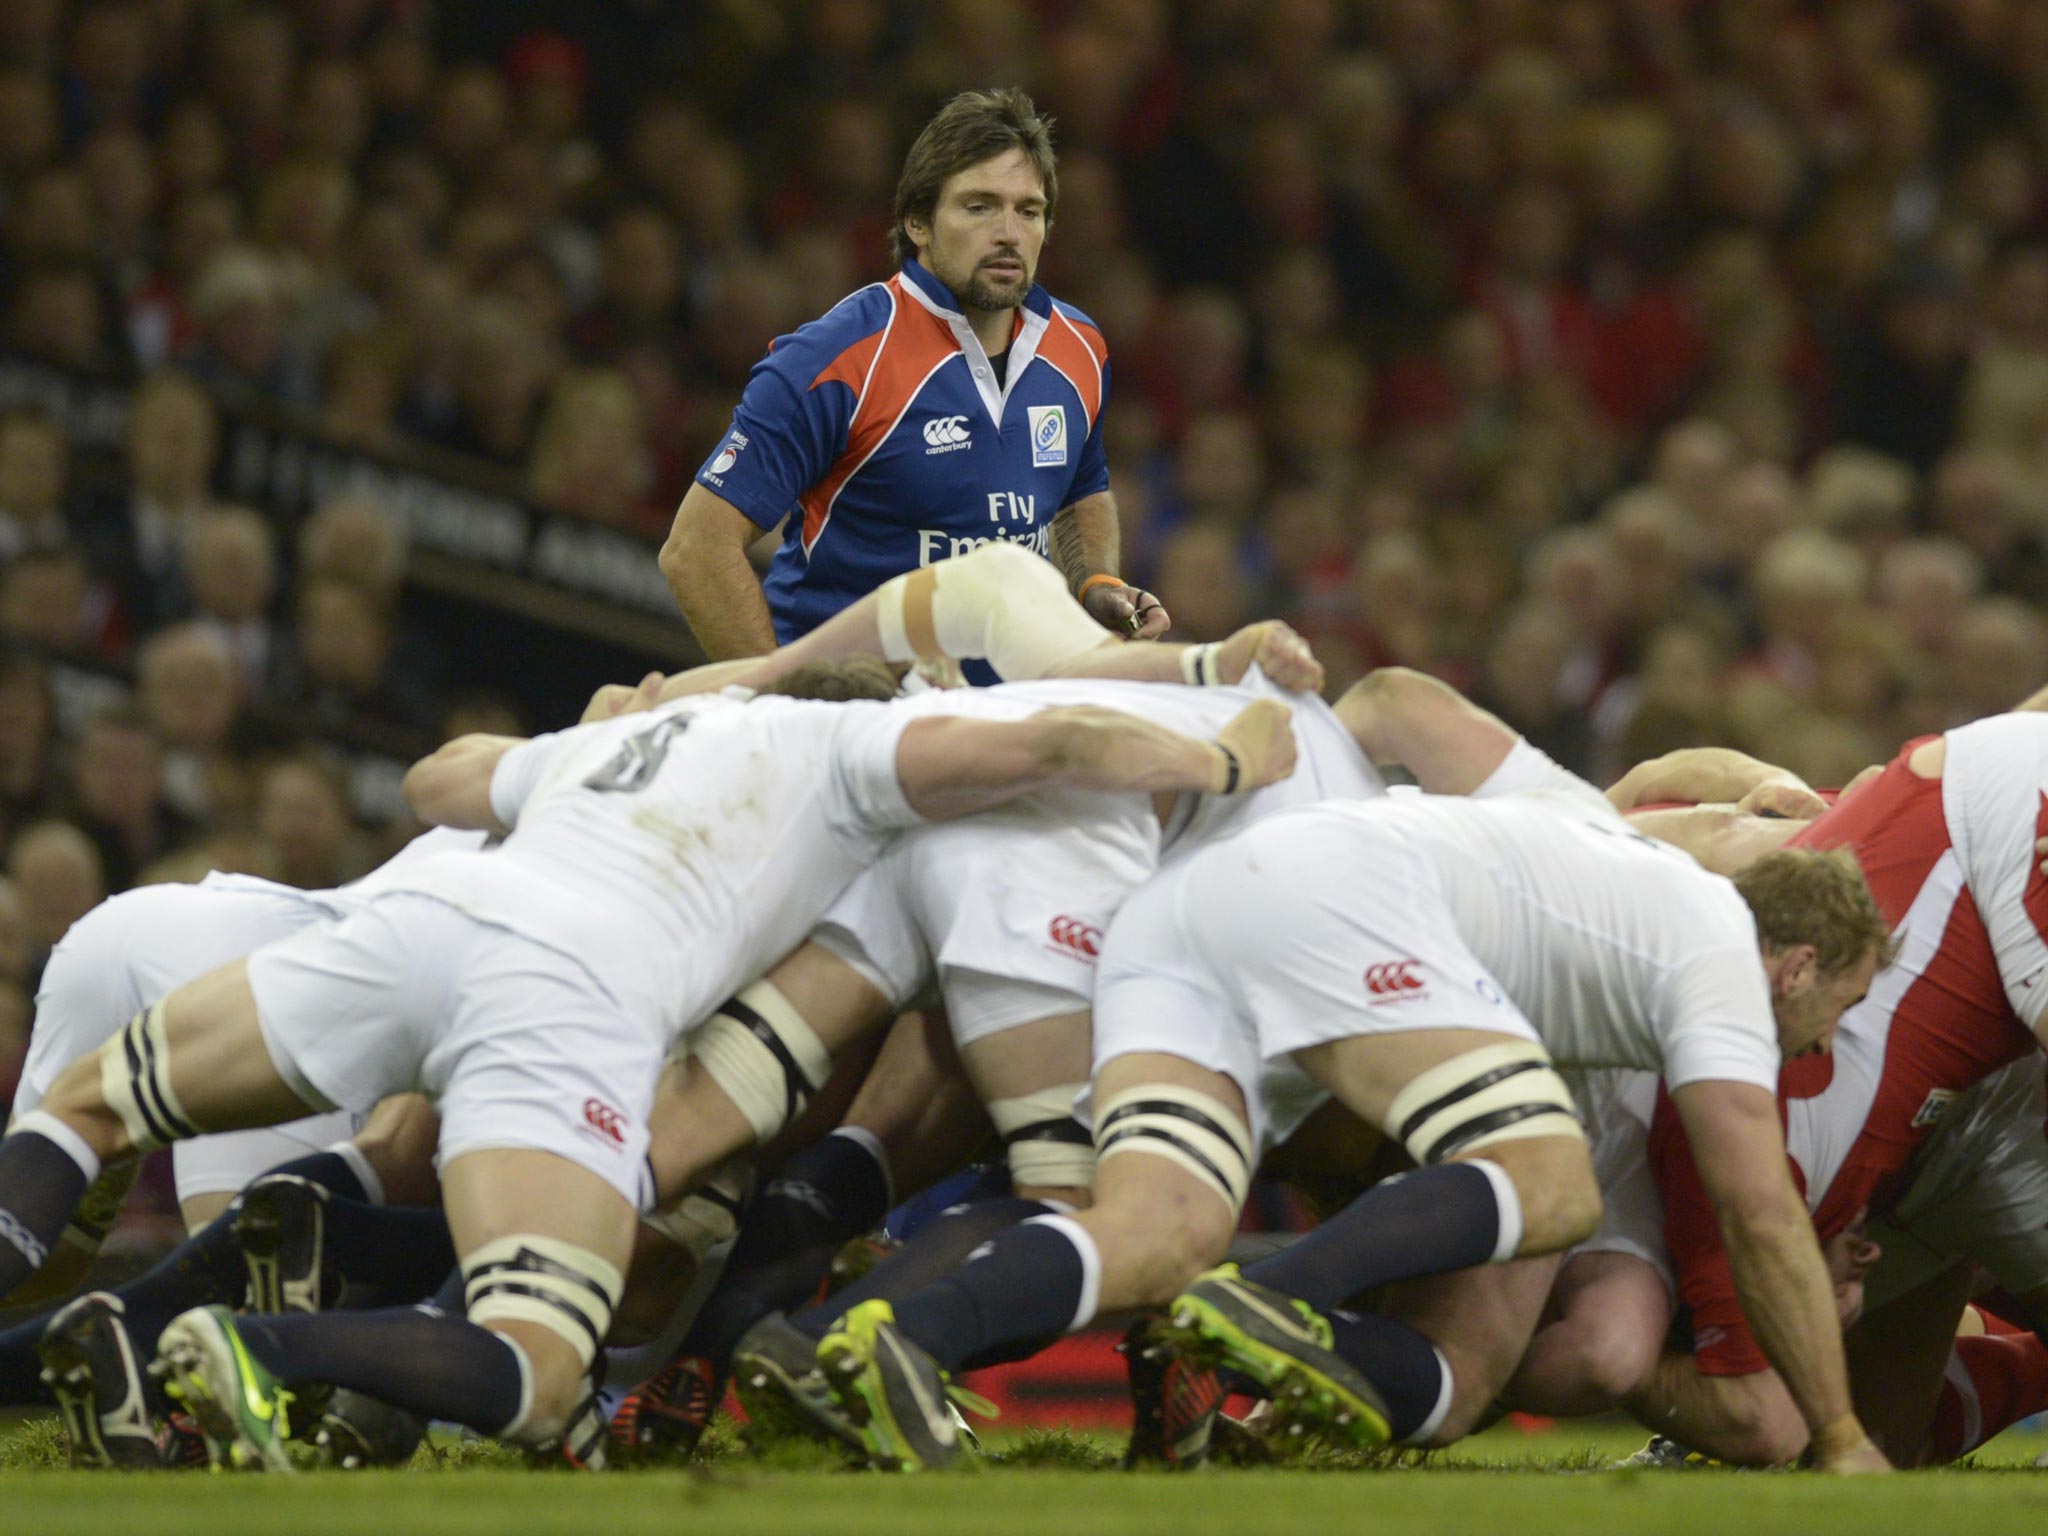 Steve Walsh came in for criticism after last year’s meeting between England and Wales in Cardiff, which the hosts won